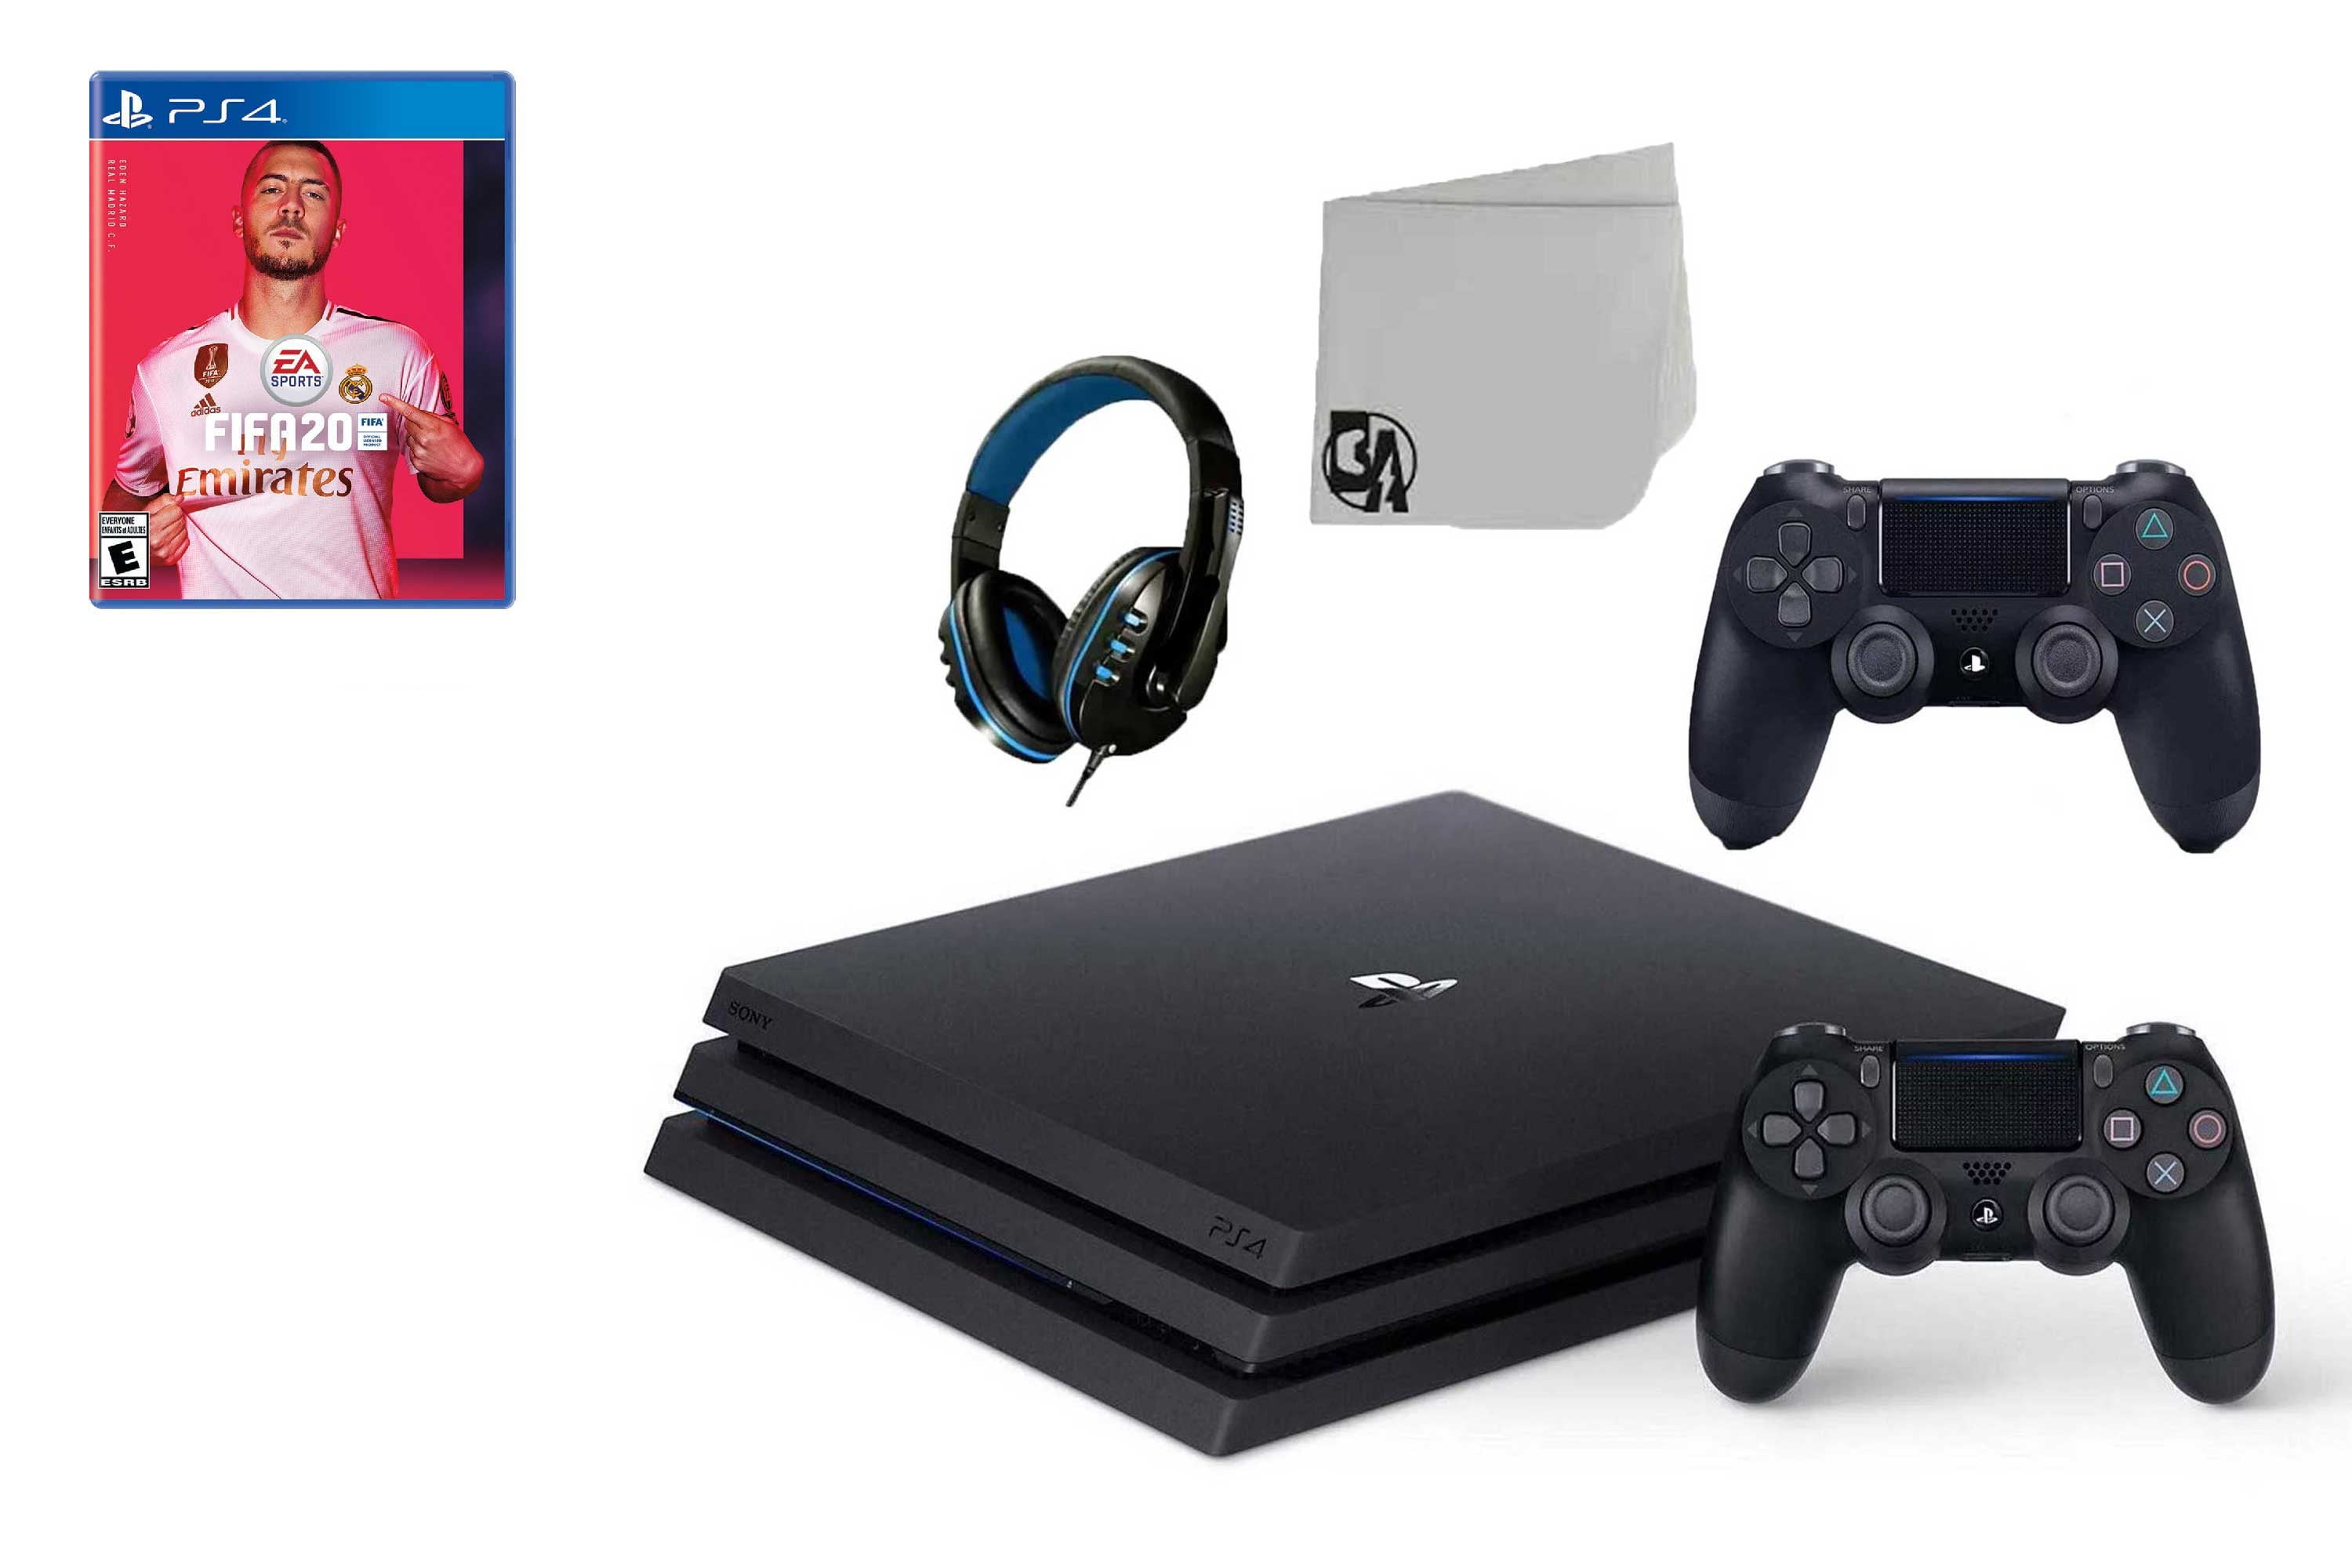 Miniature Haiku Chaiselong Sony PlayStation 4 Pro 1TB Gaming Console Black 2 Controller Included with  FIFA-20 BOLT AXTION Bundle Used - Walmart.com